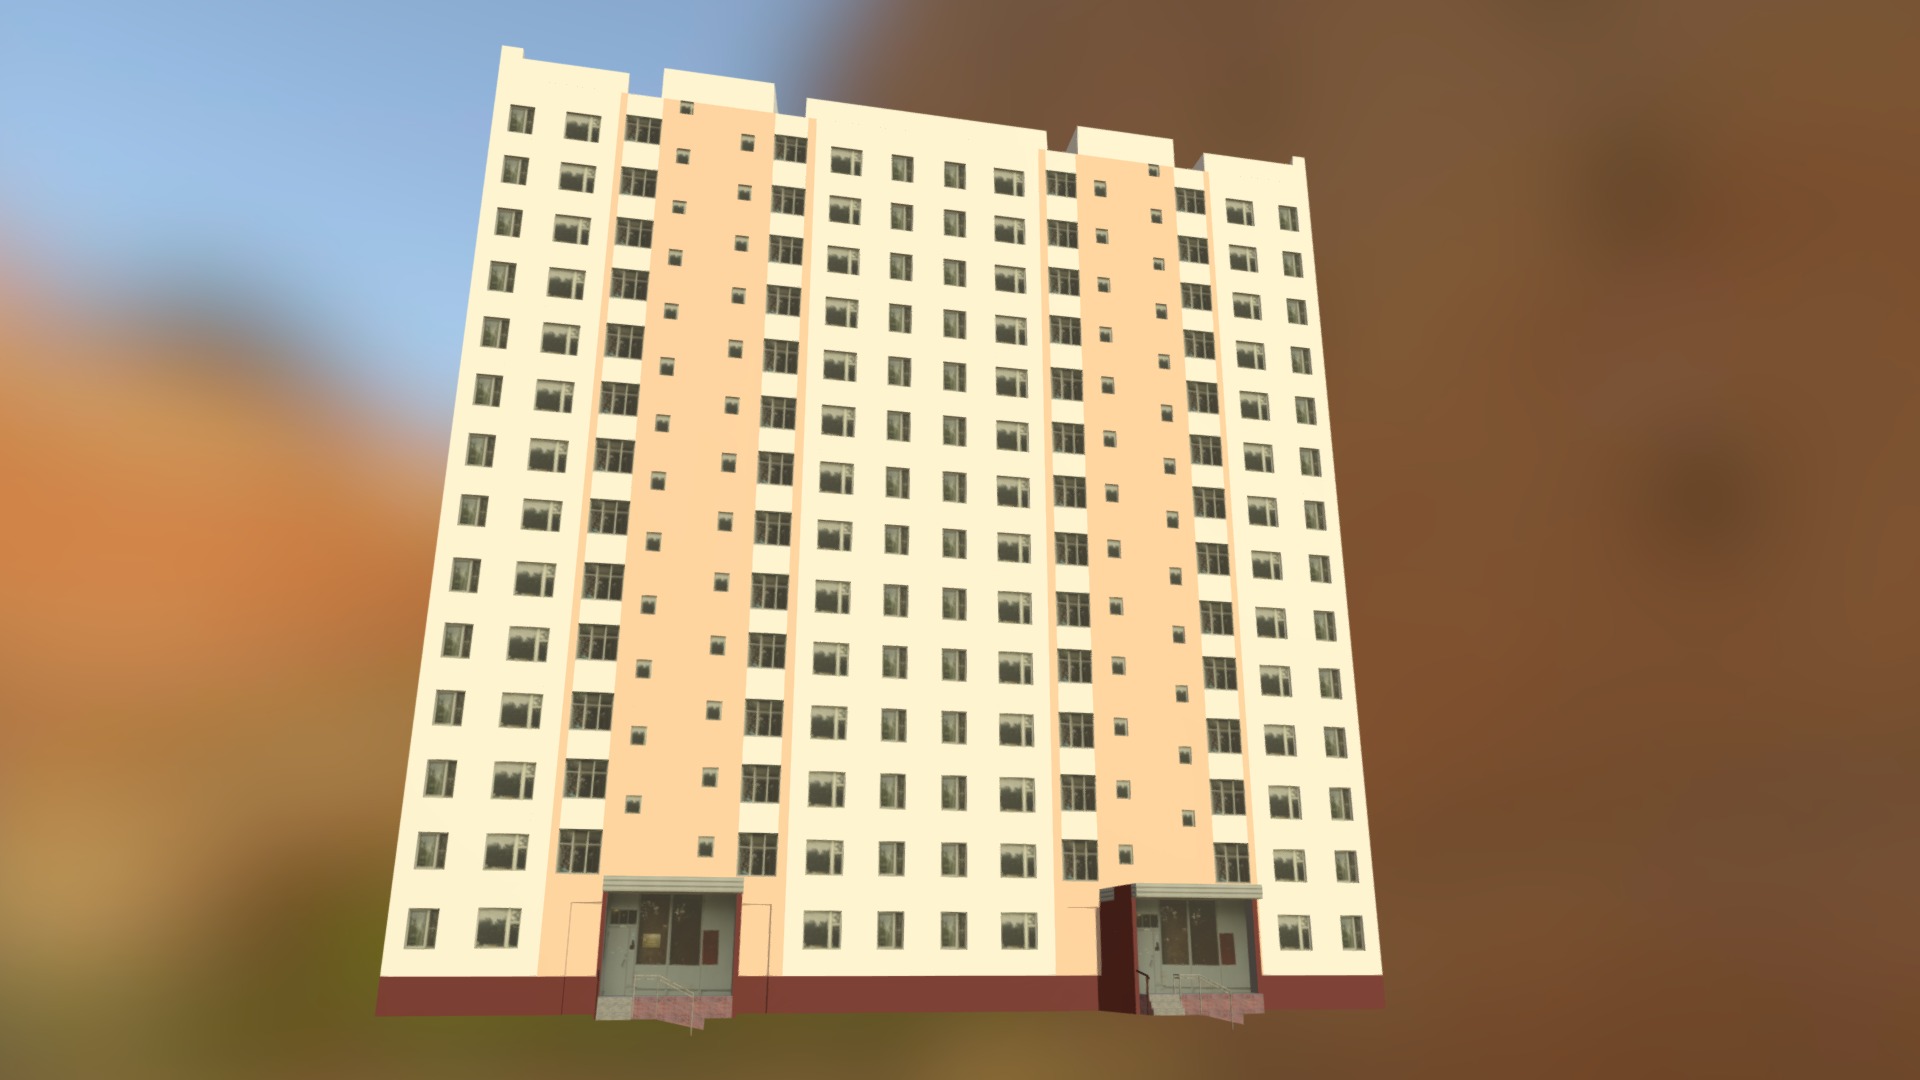 3D model House16k3 - This is a 3D model of the House16k3. The 3D model is about a tall building with many windows.